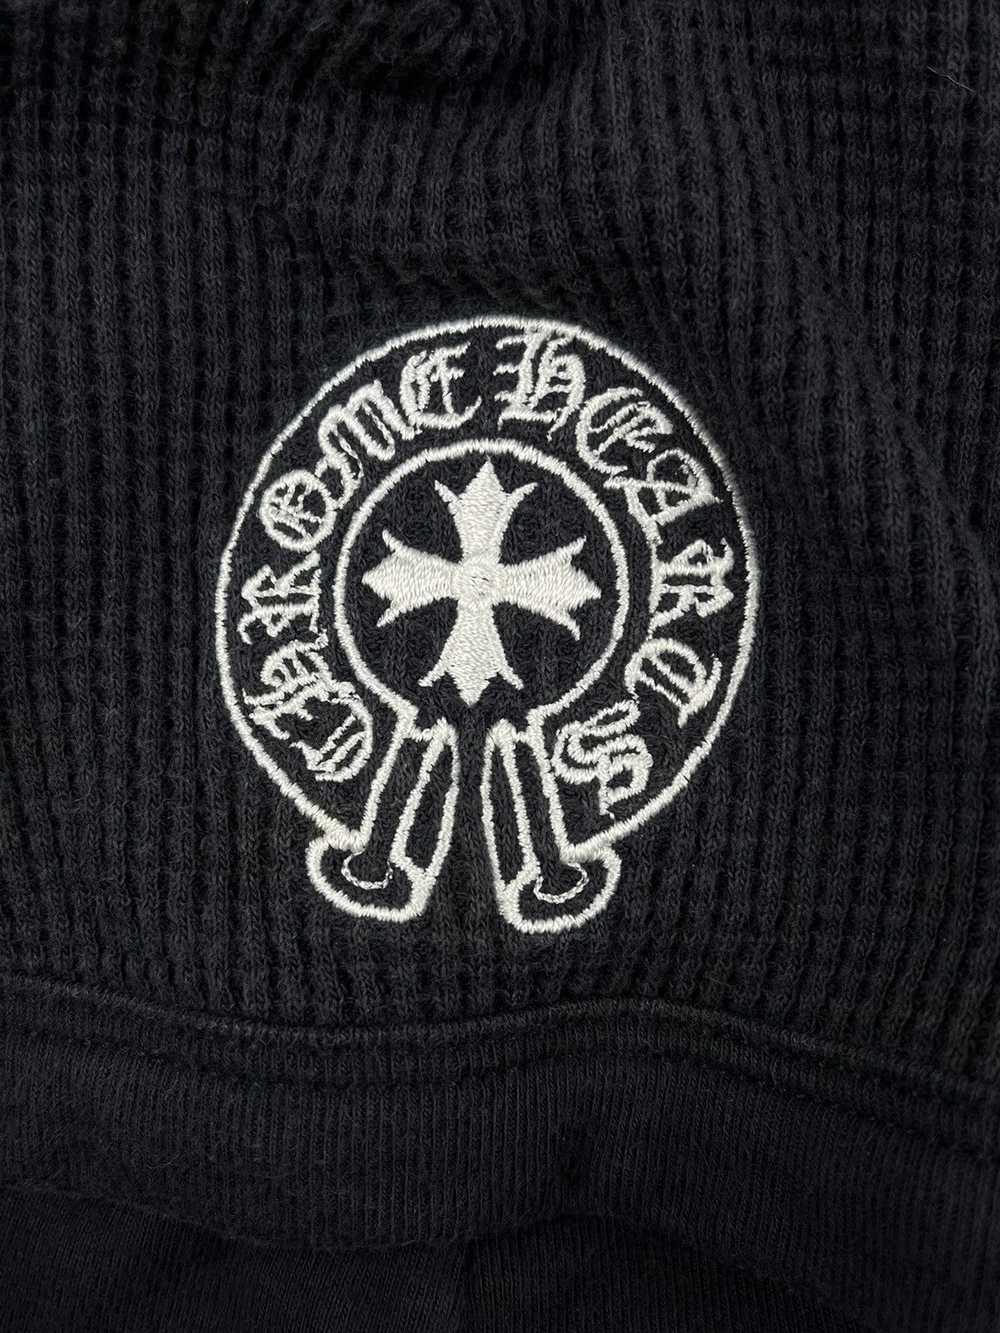 Chrome Hearts × Vintage Chrome Hearts Embroidered… - image 3